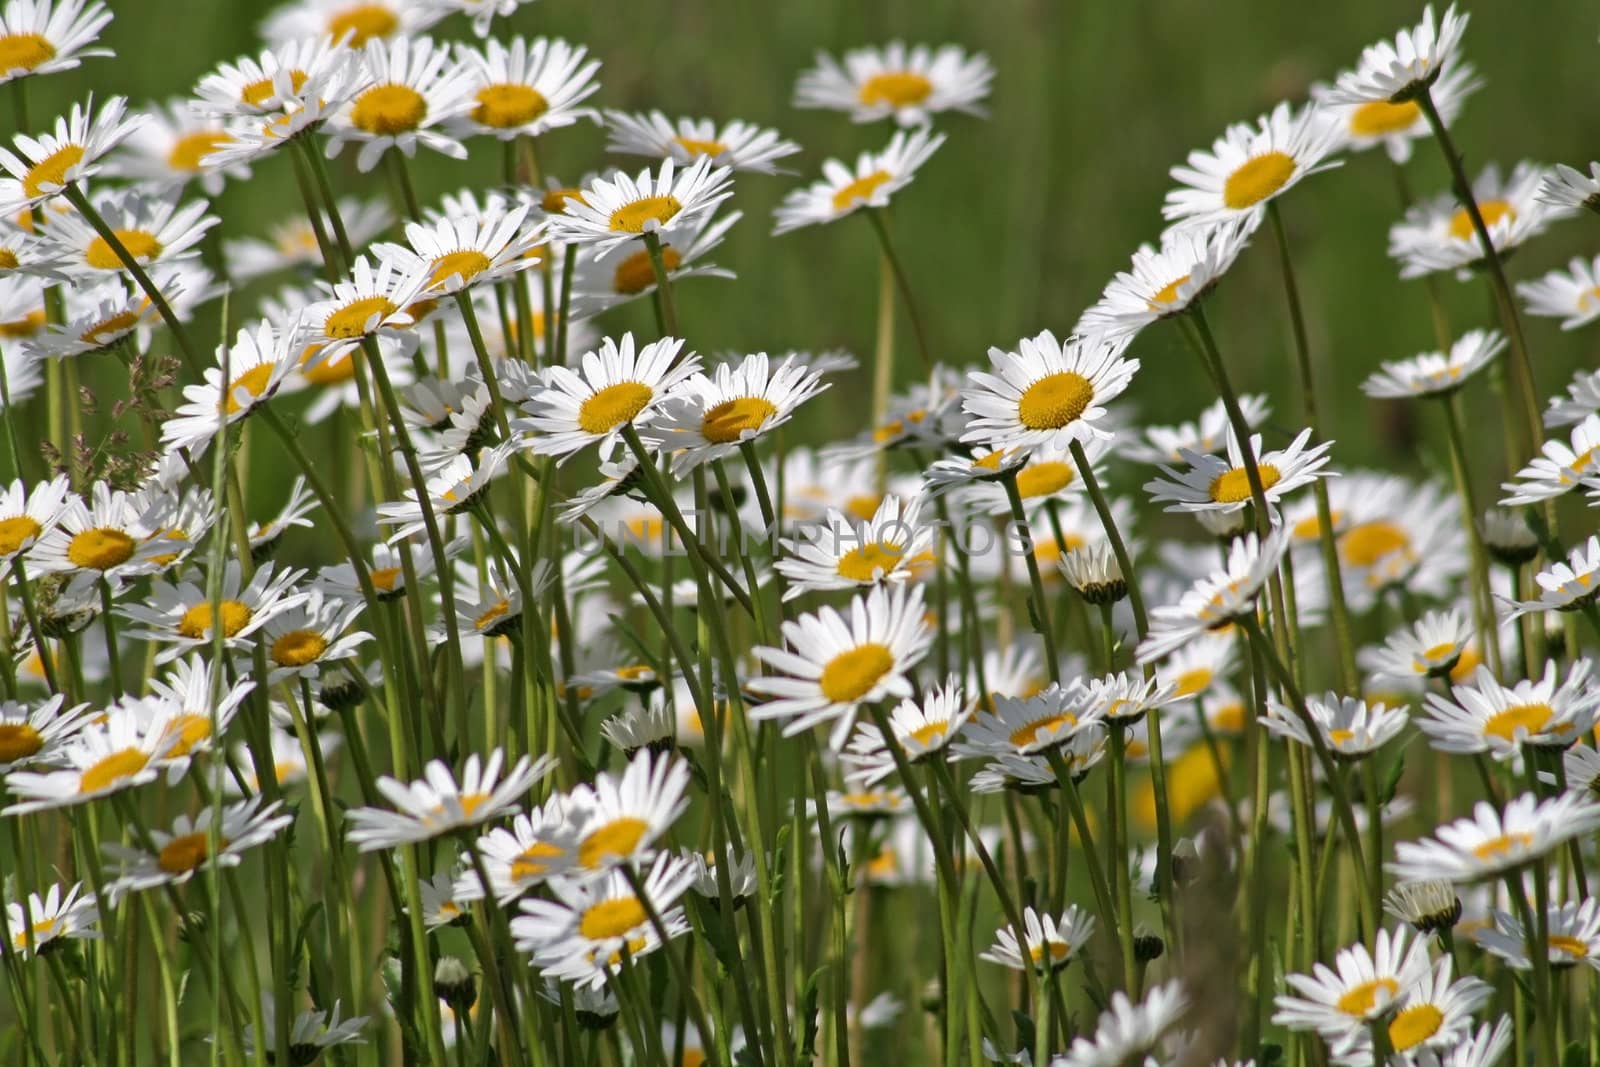 Close view of a field showing a lot of marguerite flowers